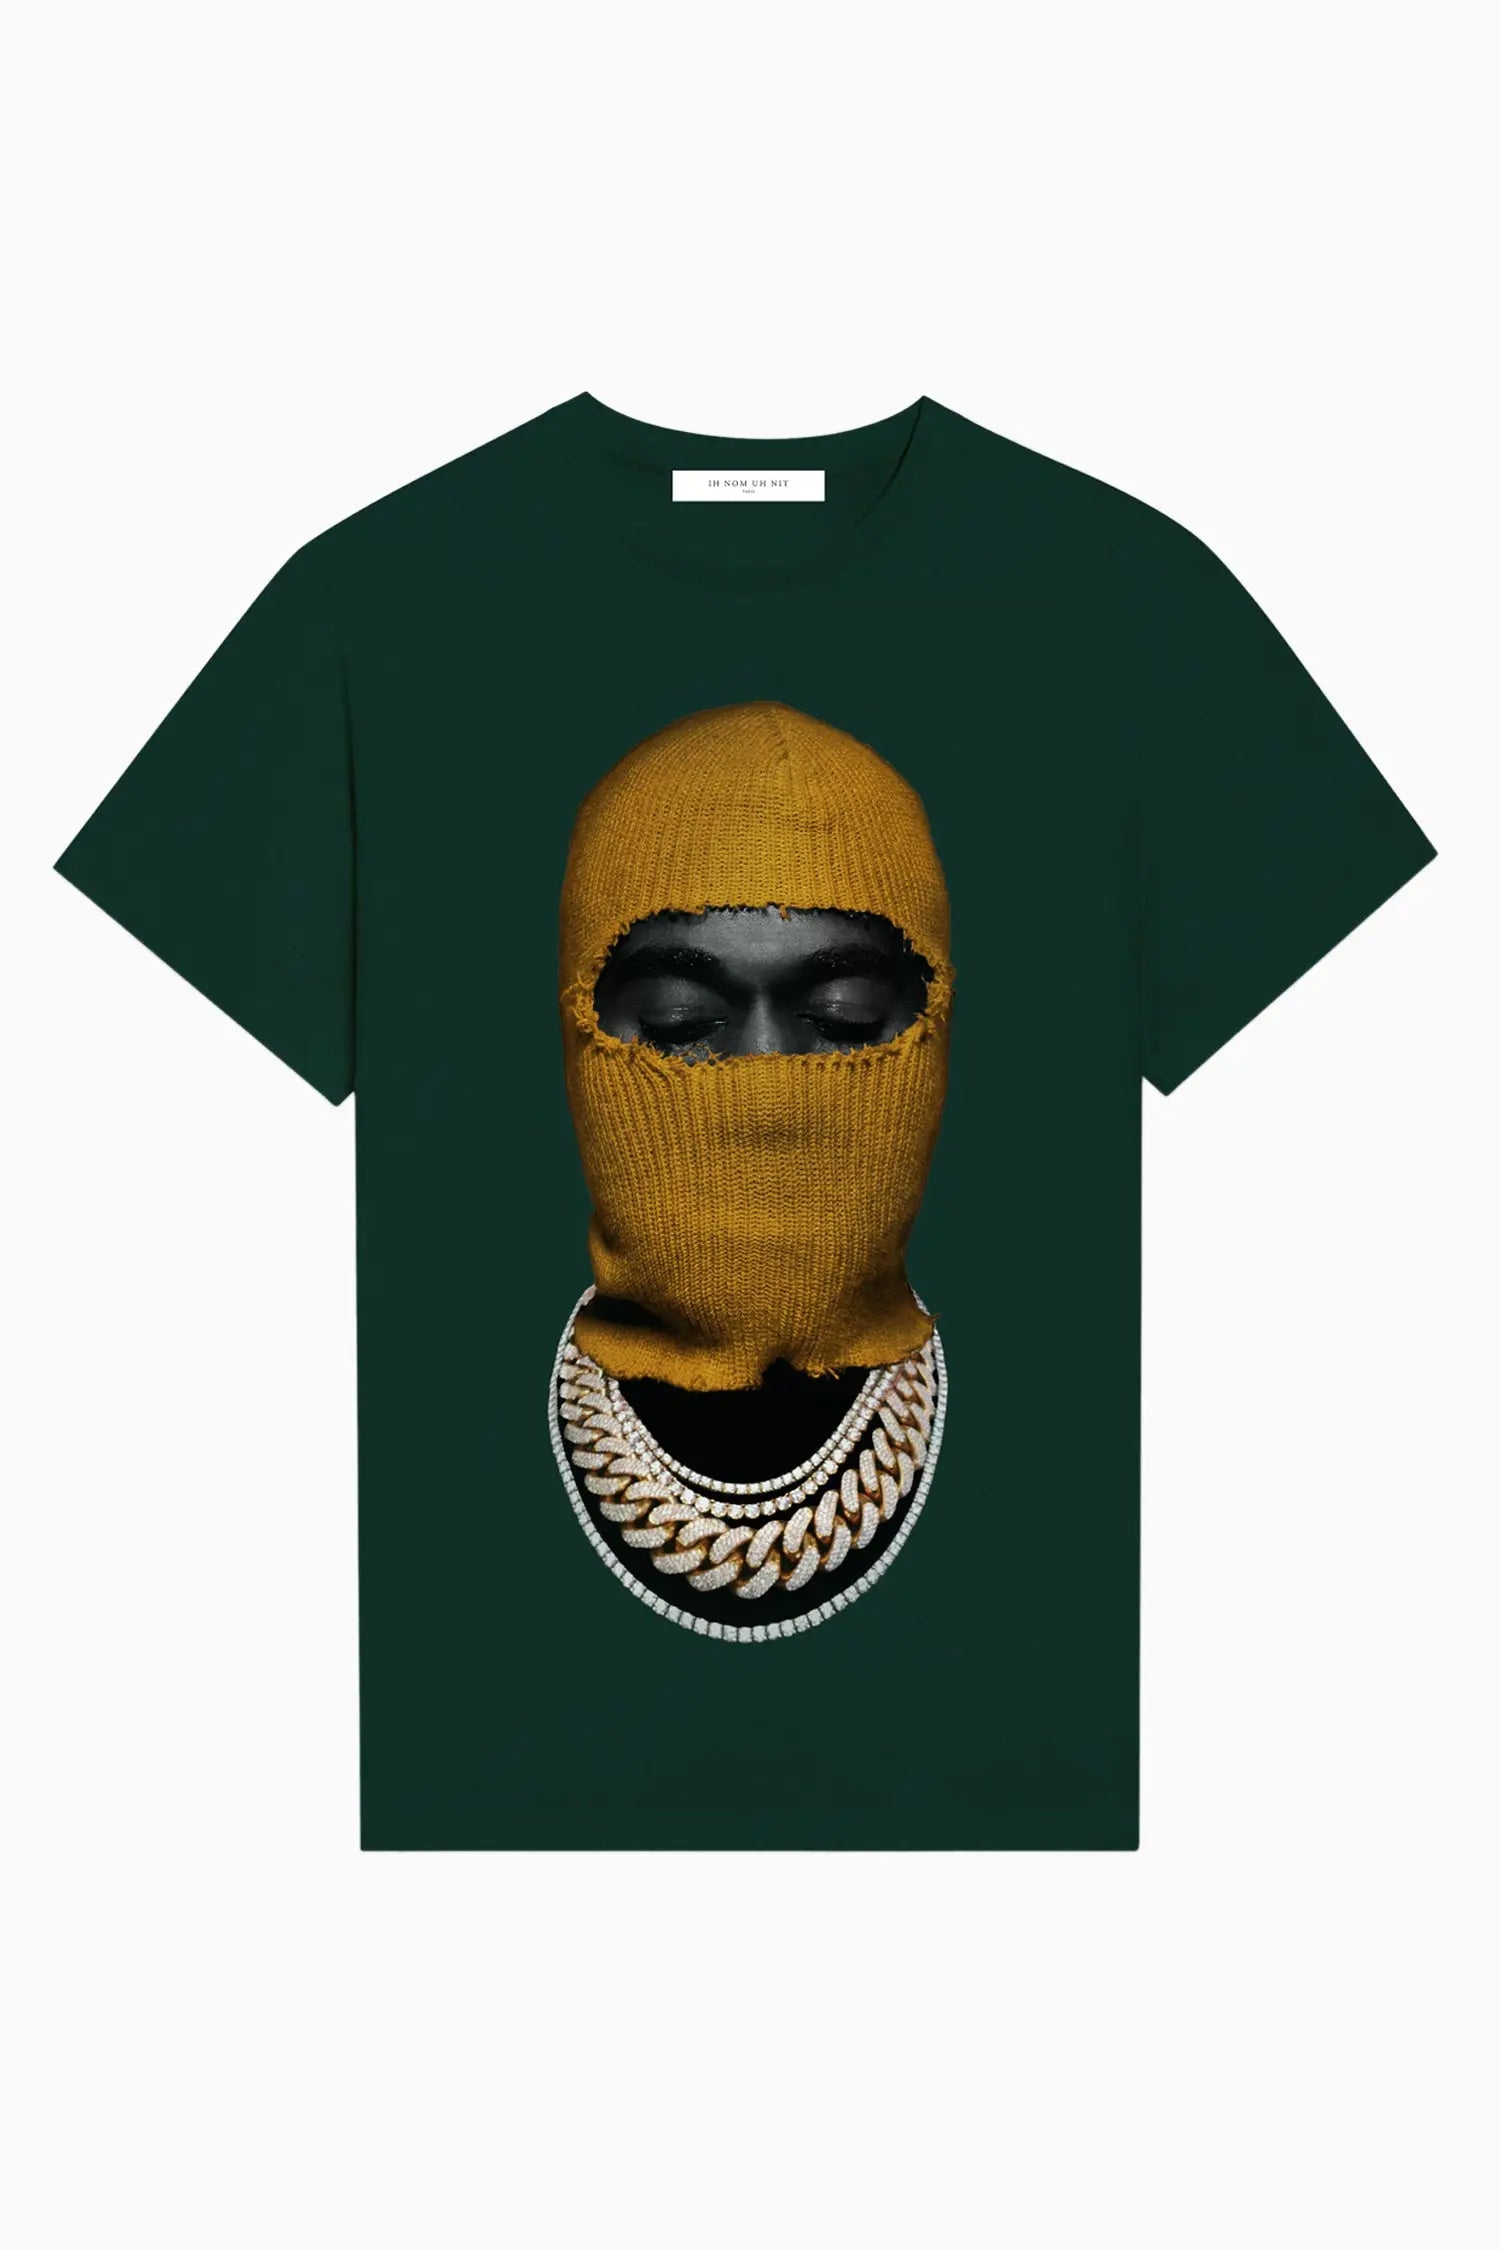 T-shirt with Mask20 - IH NOM UH NIT